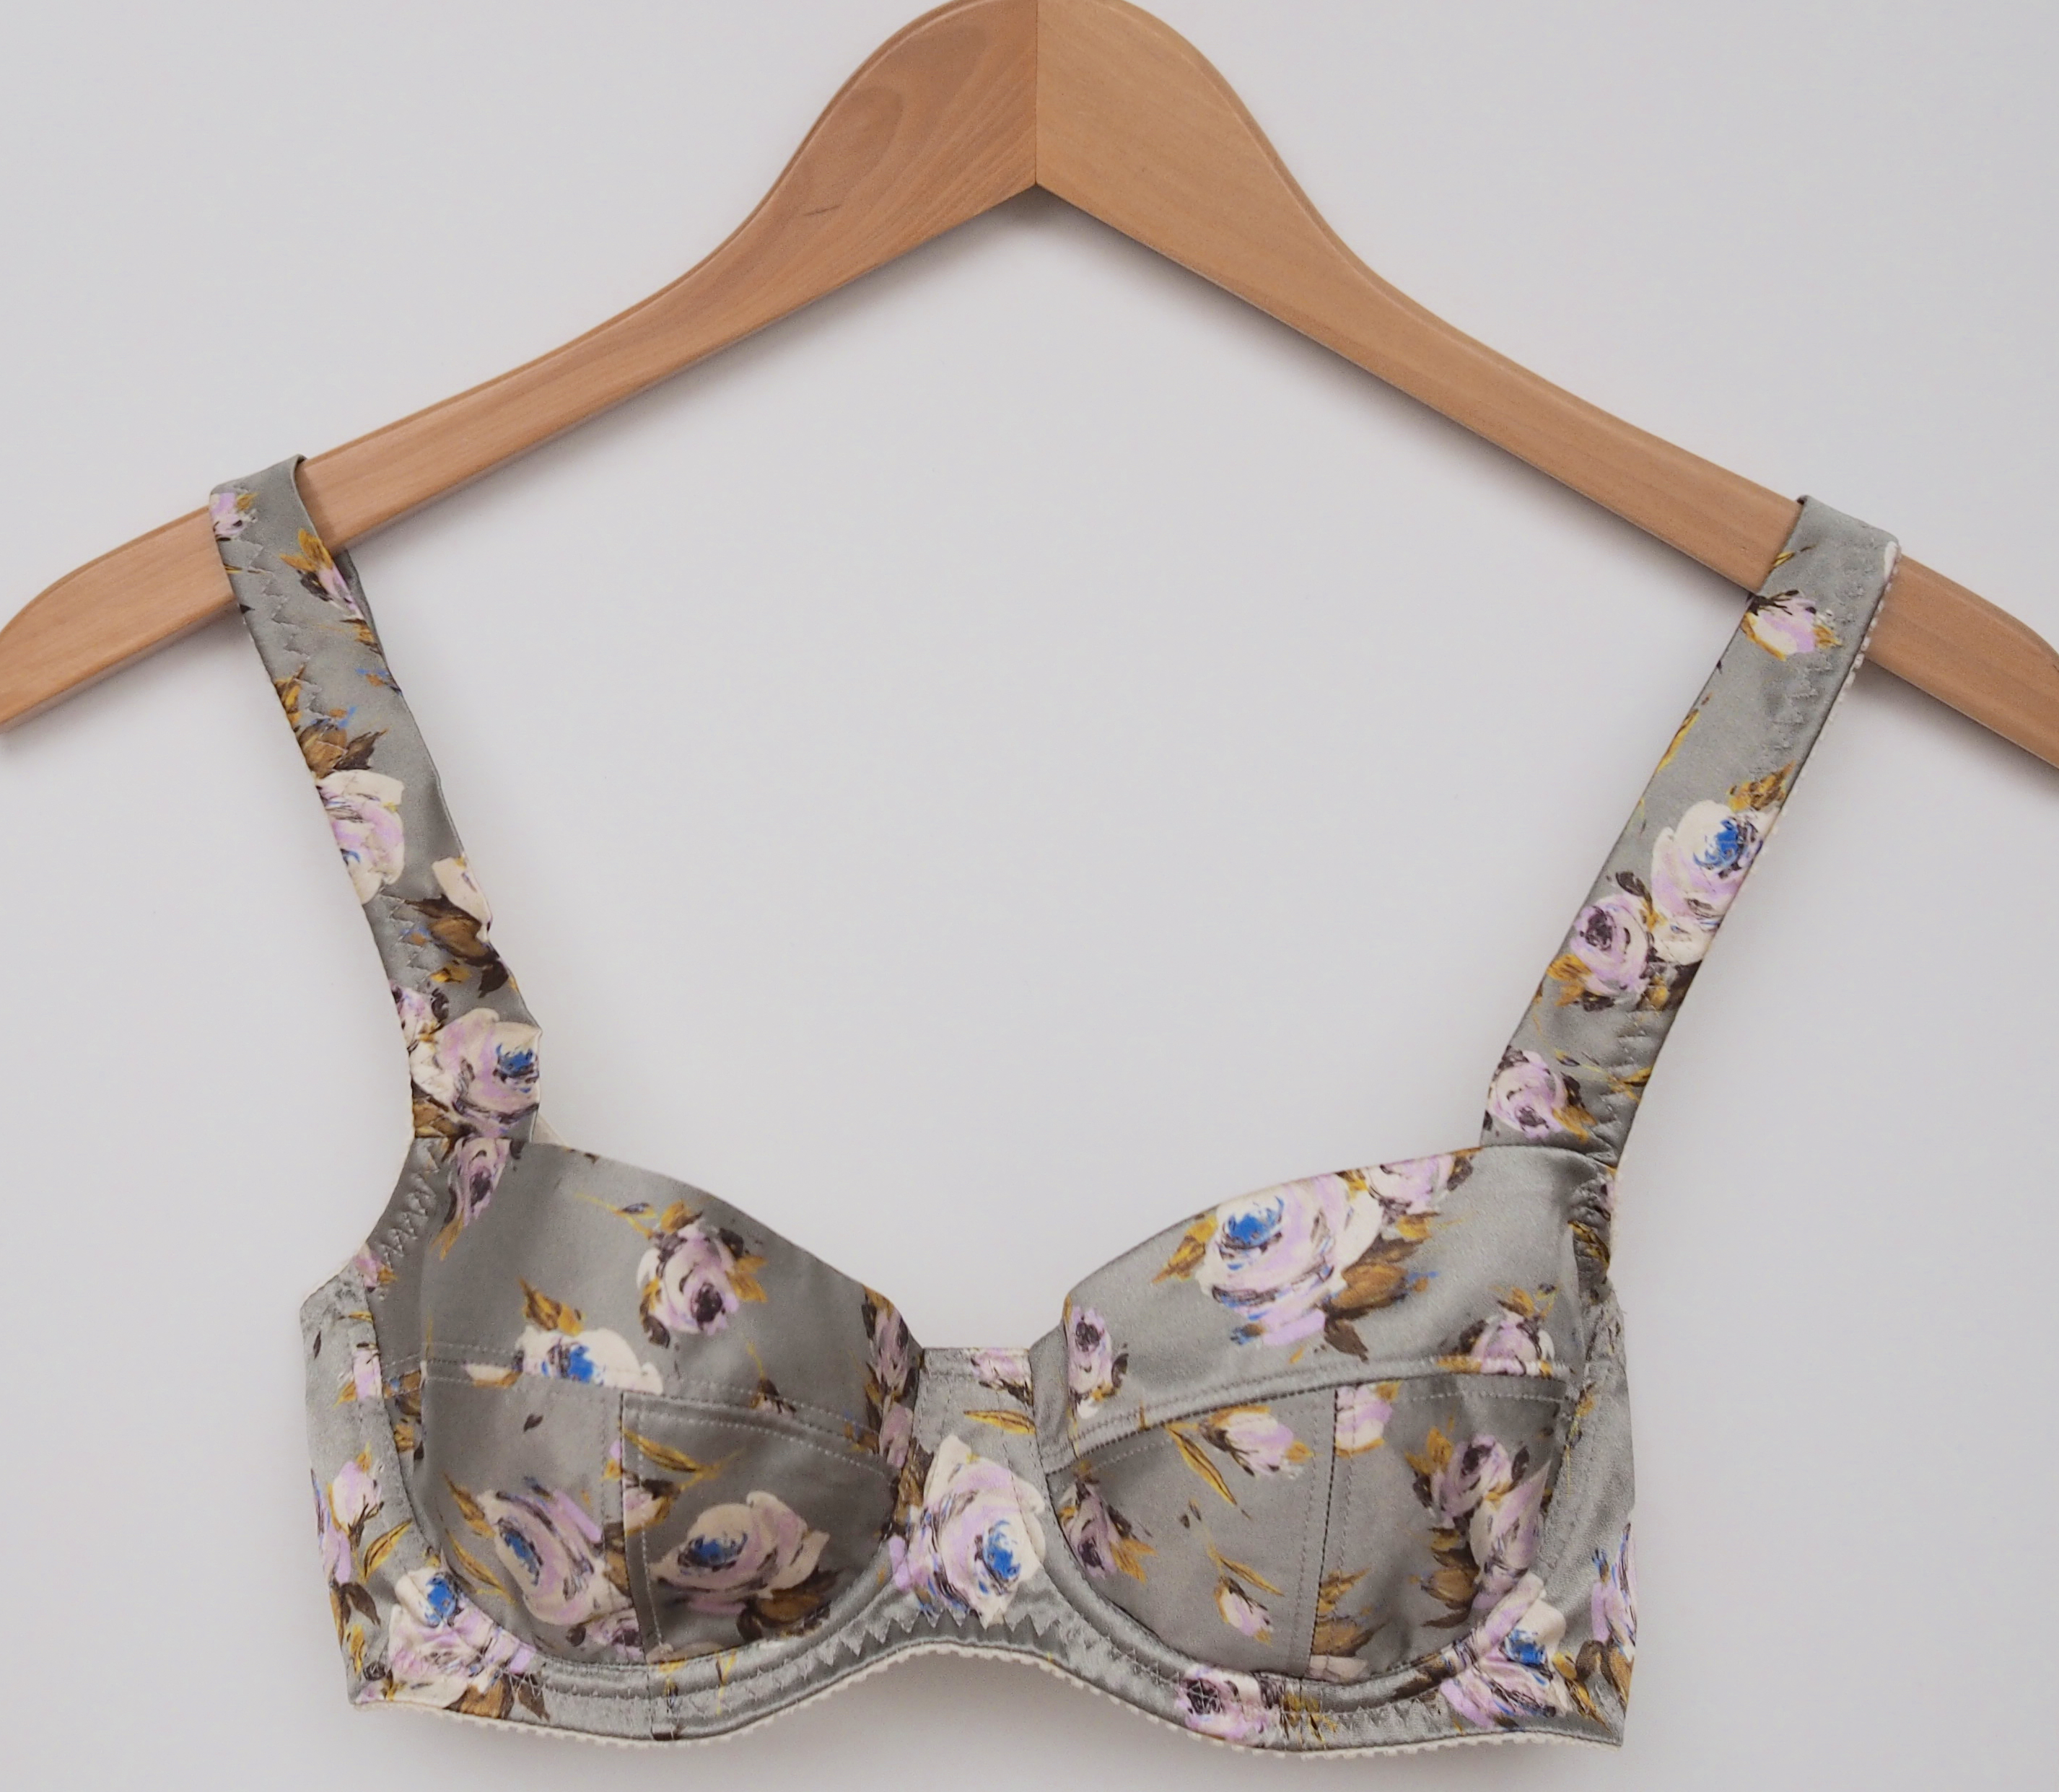 A Few Threads Loose: 1940's Bra Sew-Along, and a Sewing Pattern Giveaway!